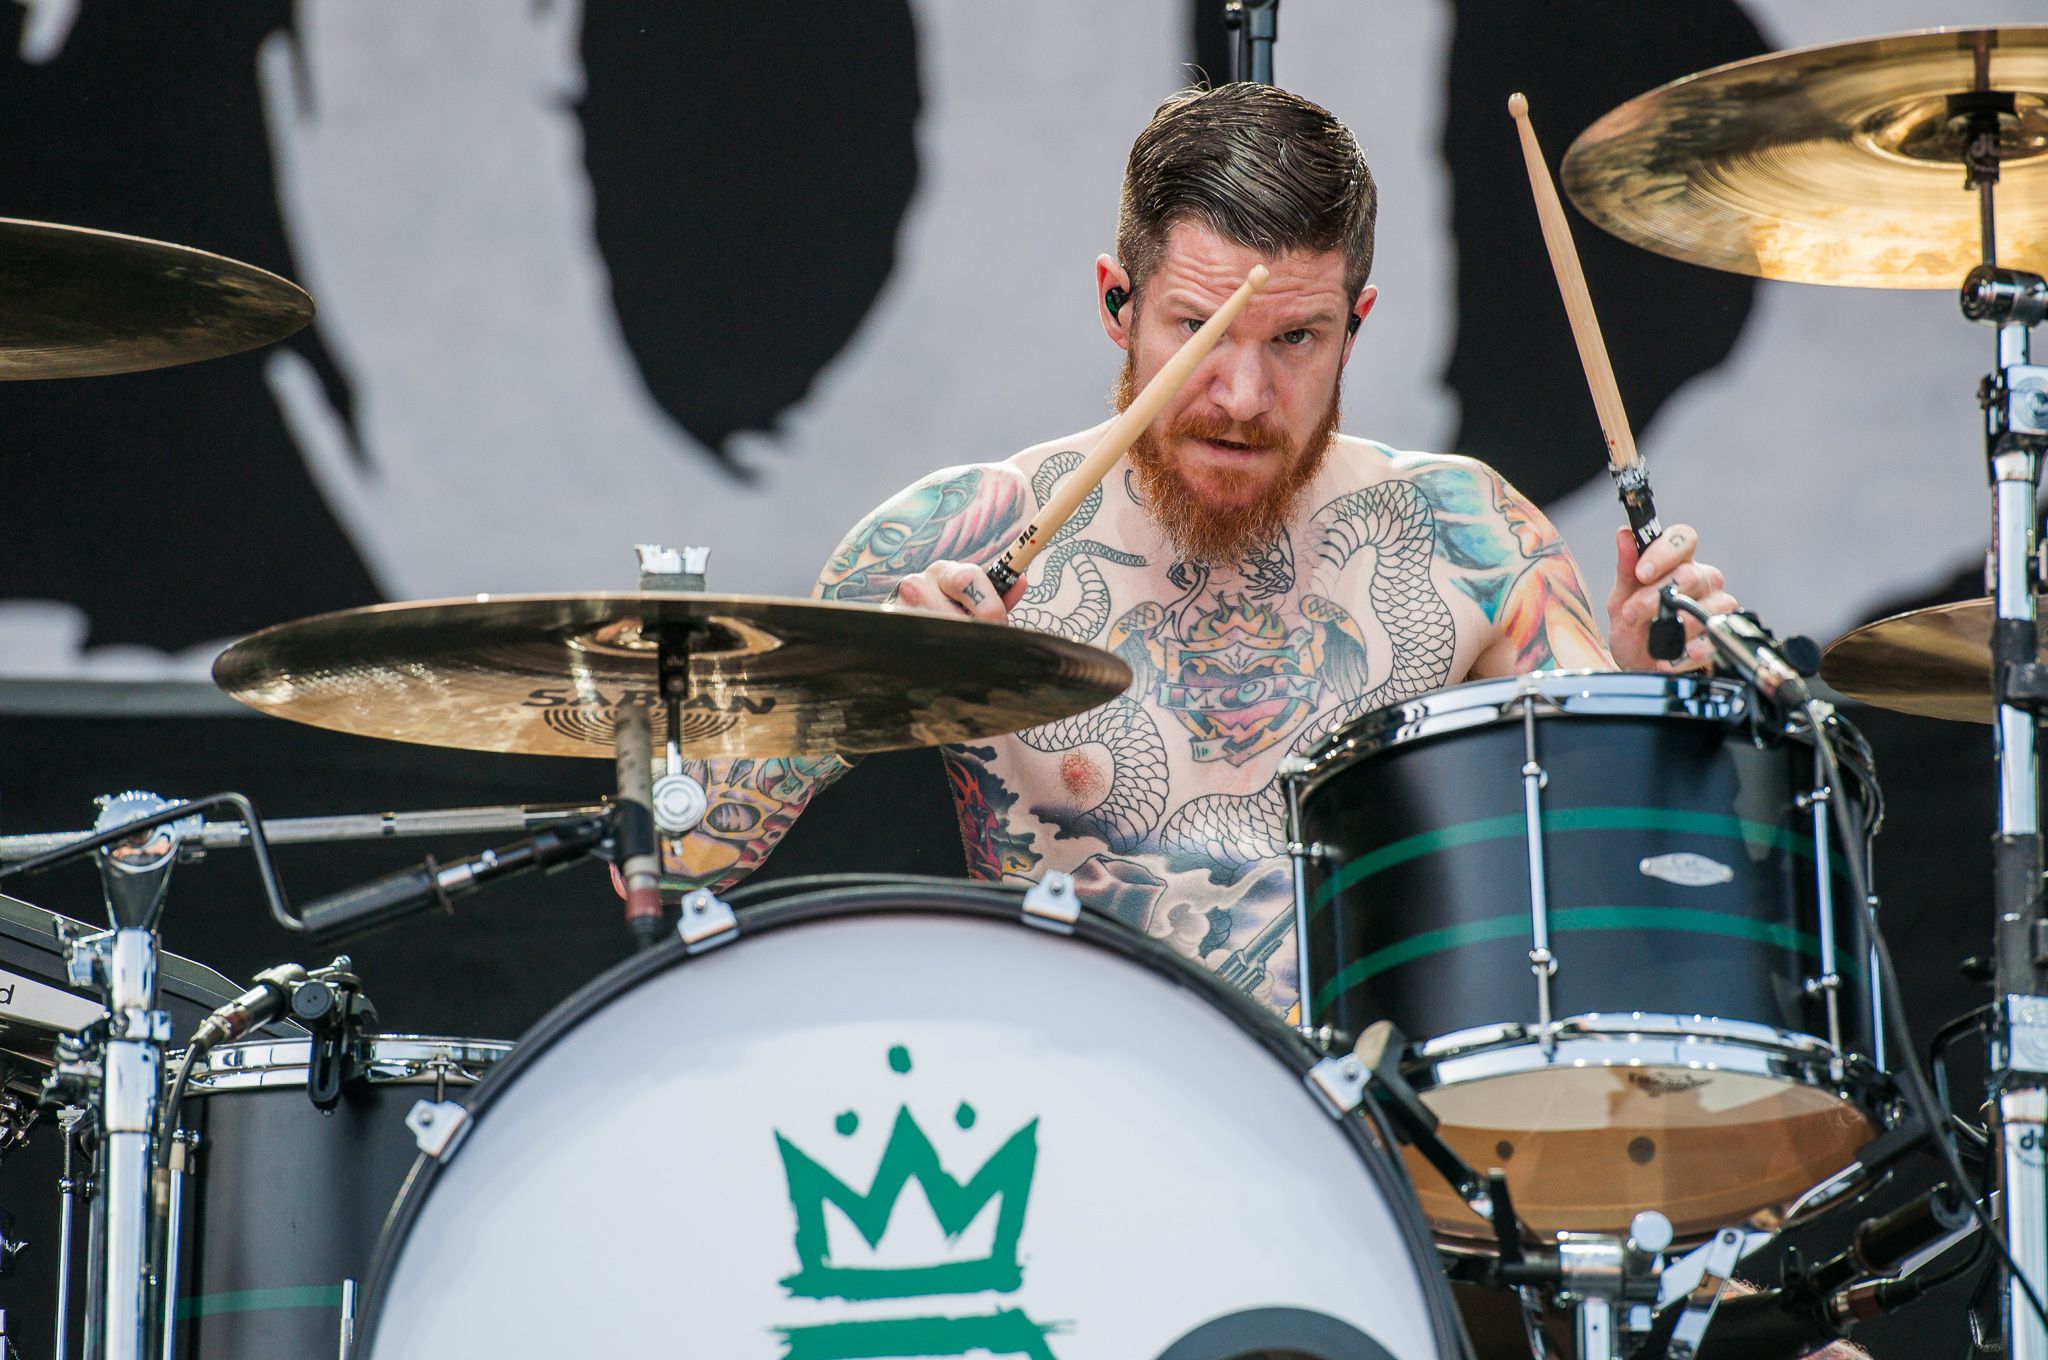 Drummer Andy Hurley performs with Fall Out Boy in 2014. Photo by Stefan Brending from Wikimedia.